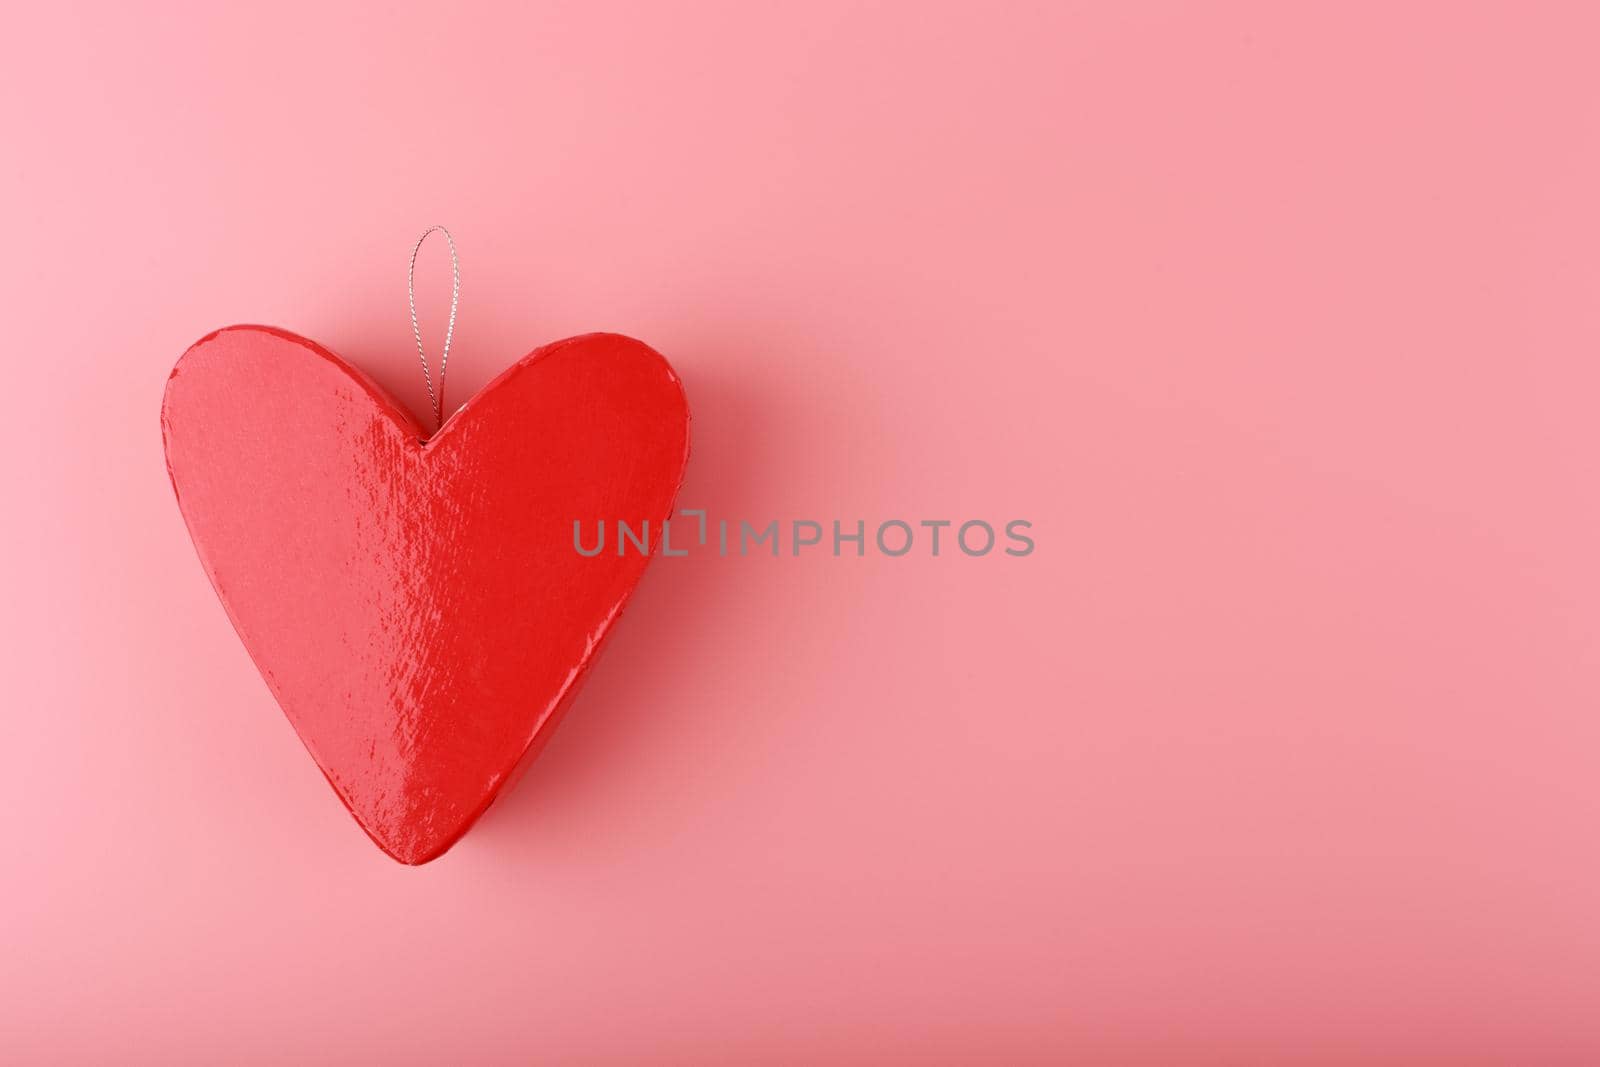 Red heart shaped gift box on bright pink background with copy space. Concept of St. Valentine's day, love and couple's gifts for holidays and anniversary. 